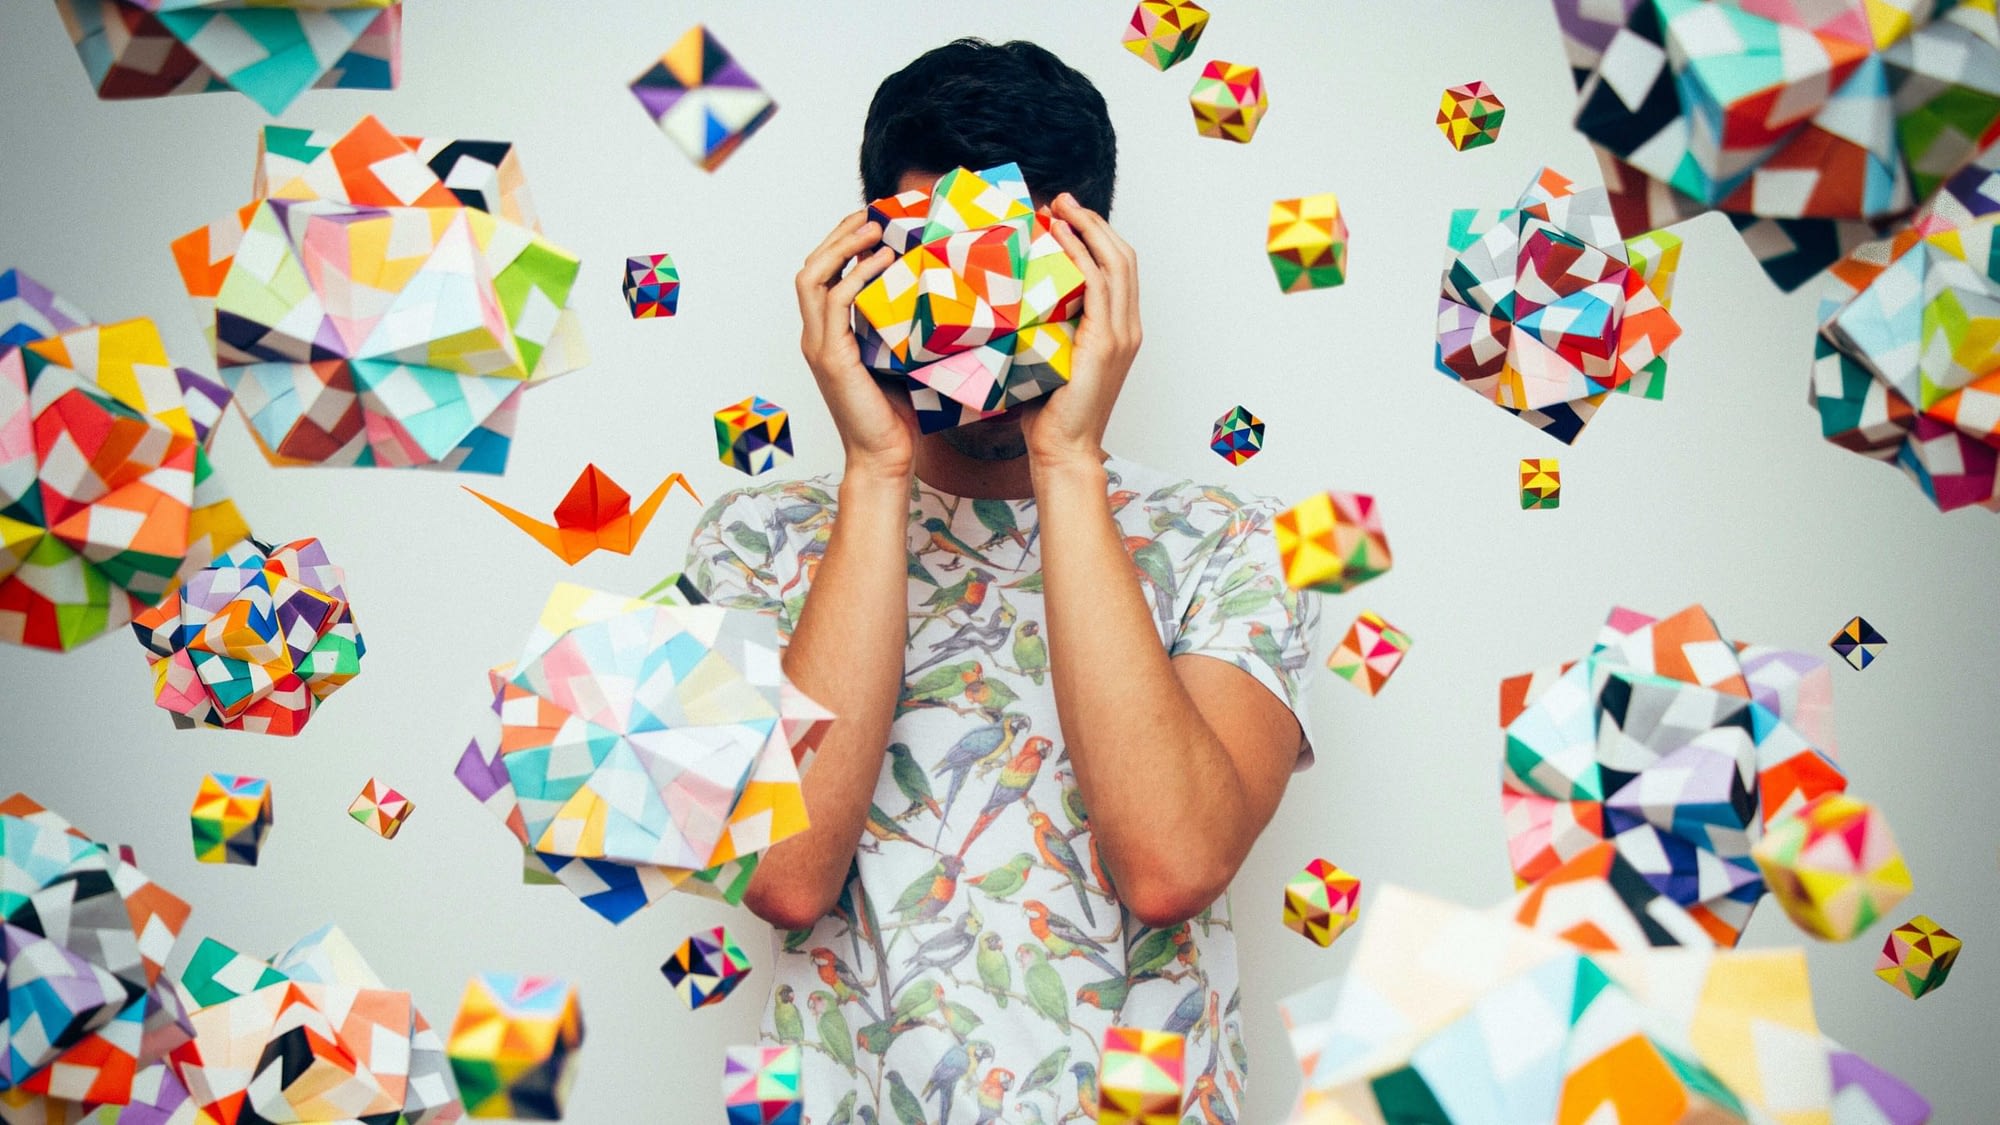 Image: A man holding a colorful cube in front of his face, and surrounded by hanging colorful cubes of the same type.